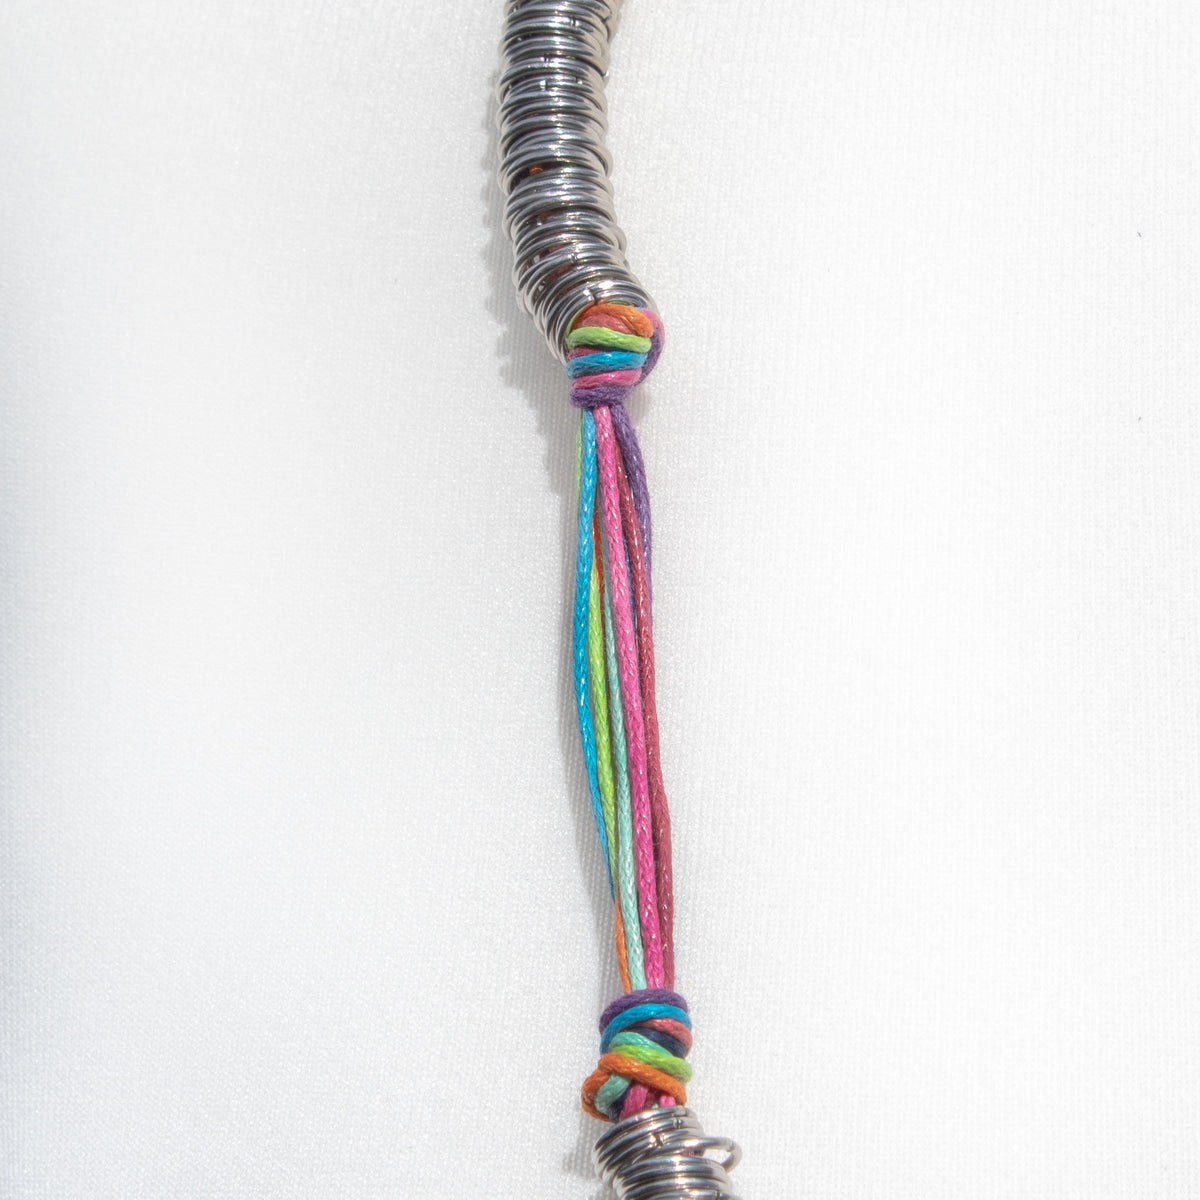 Rainbow Cord &amp; Metallic Silver Ring Necklace | Necklace - The Naughty Shrew